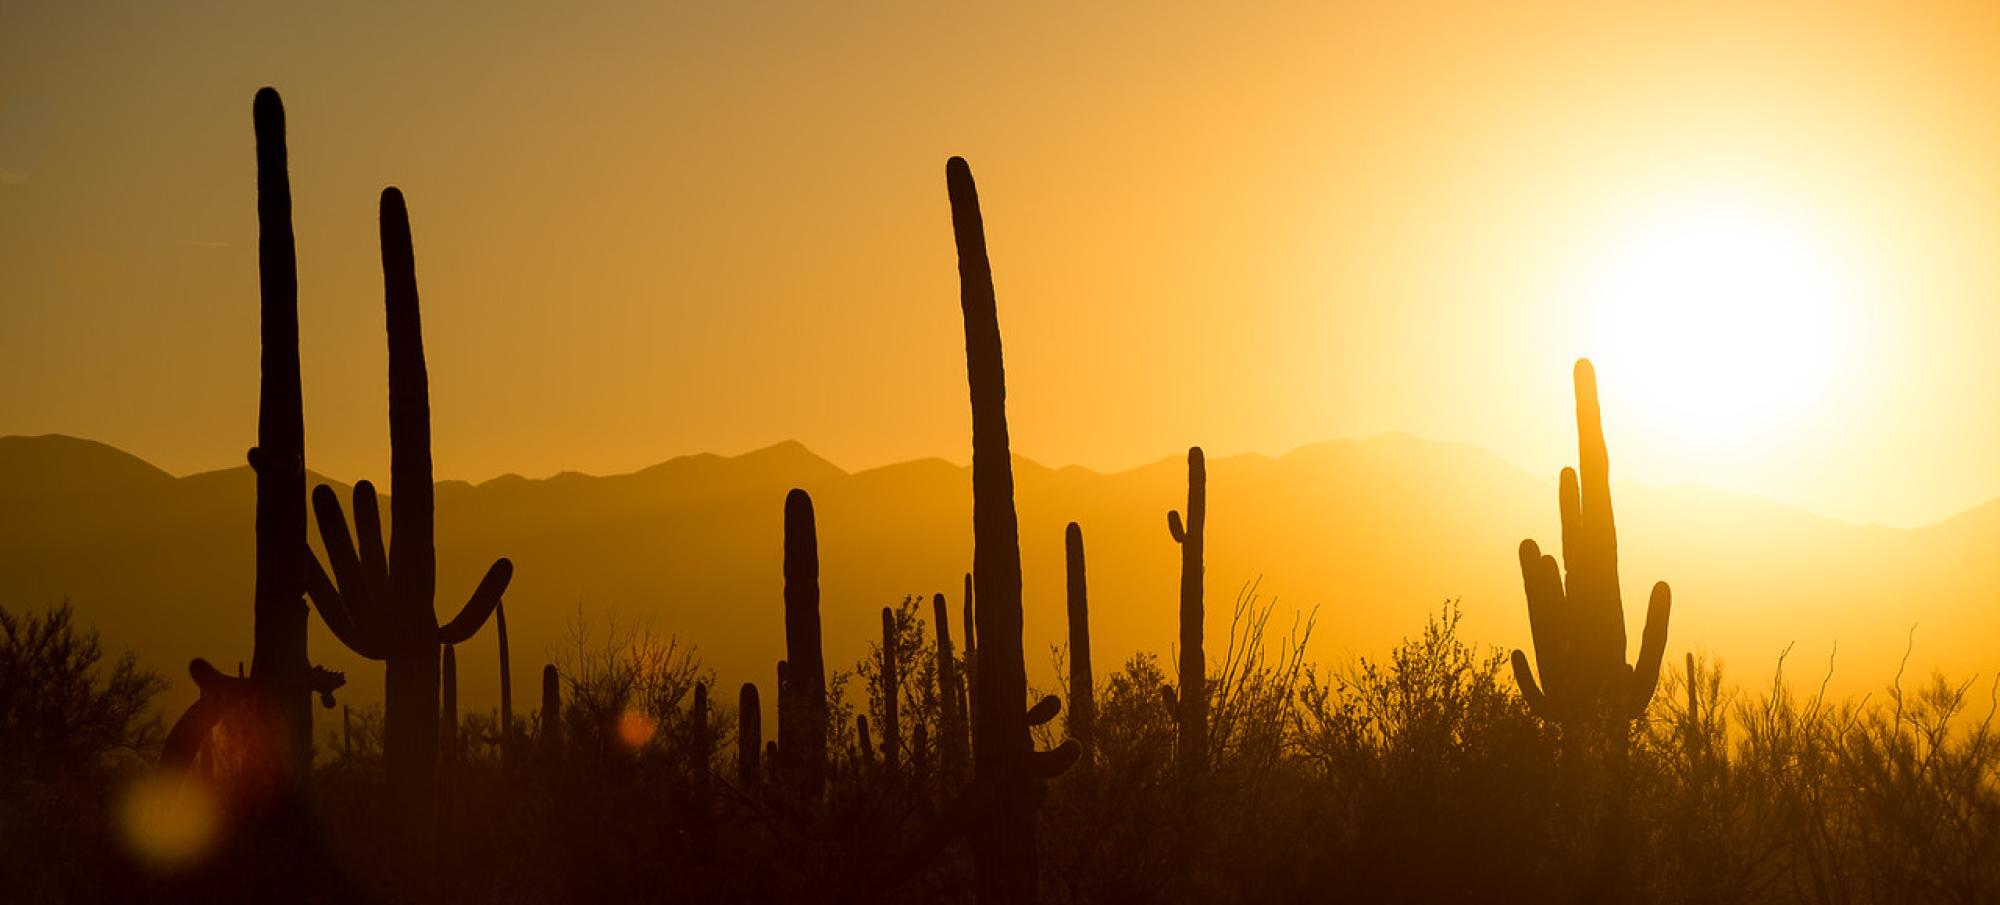 Sunset image of the desert, focusing on the tall saguaros in the distance